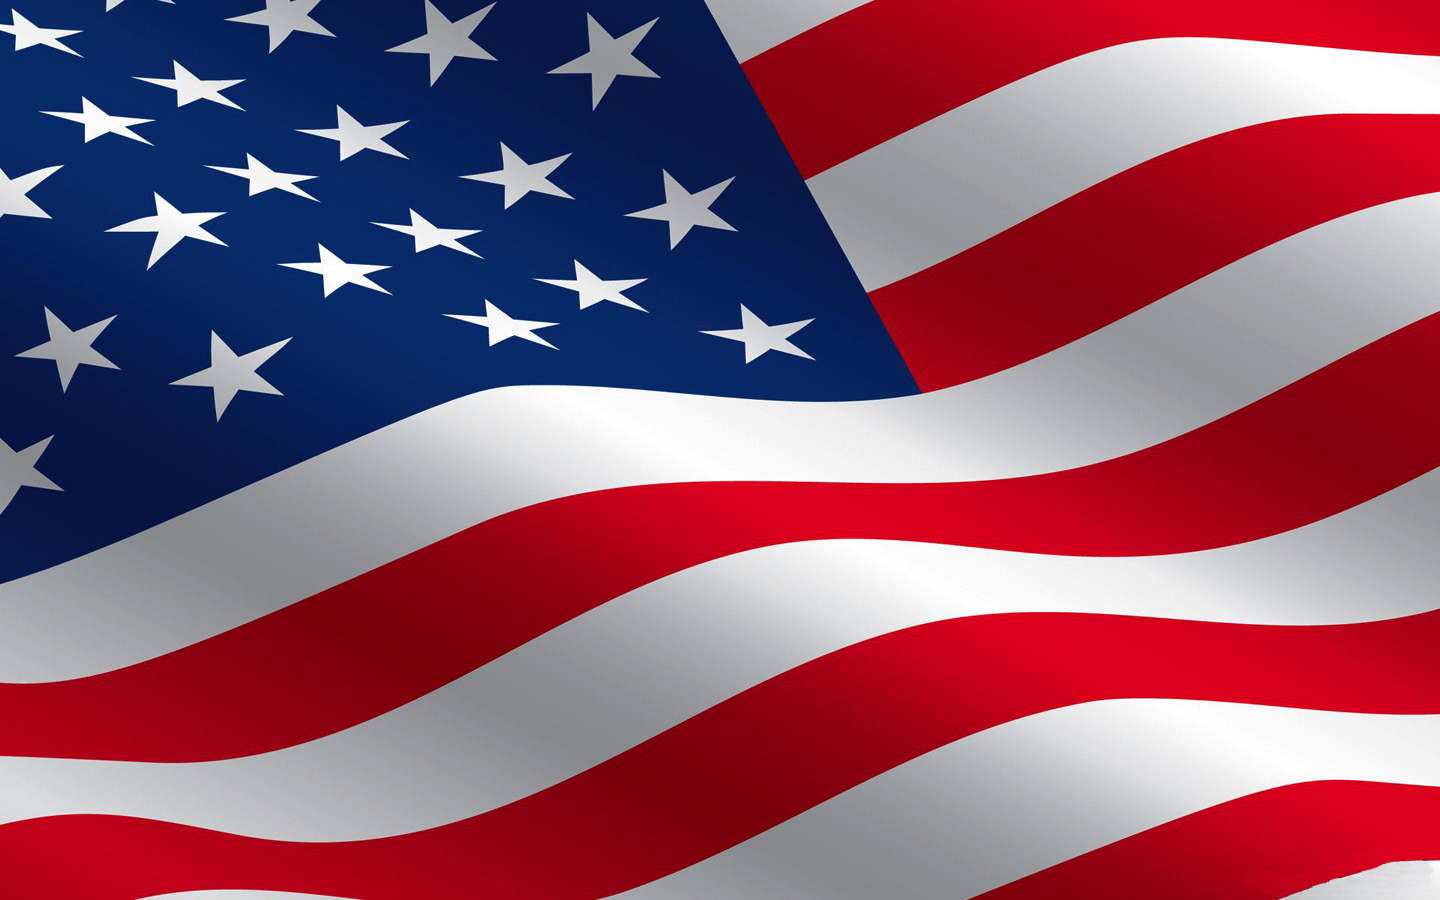 American Flag Hd Wallpapers Top Free American Flag Hd Backgrounds Wallpaperaccess